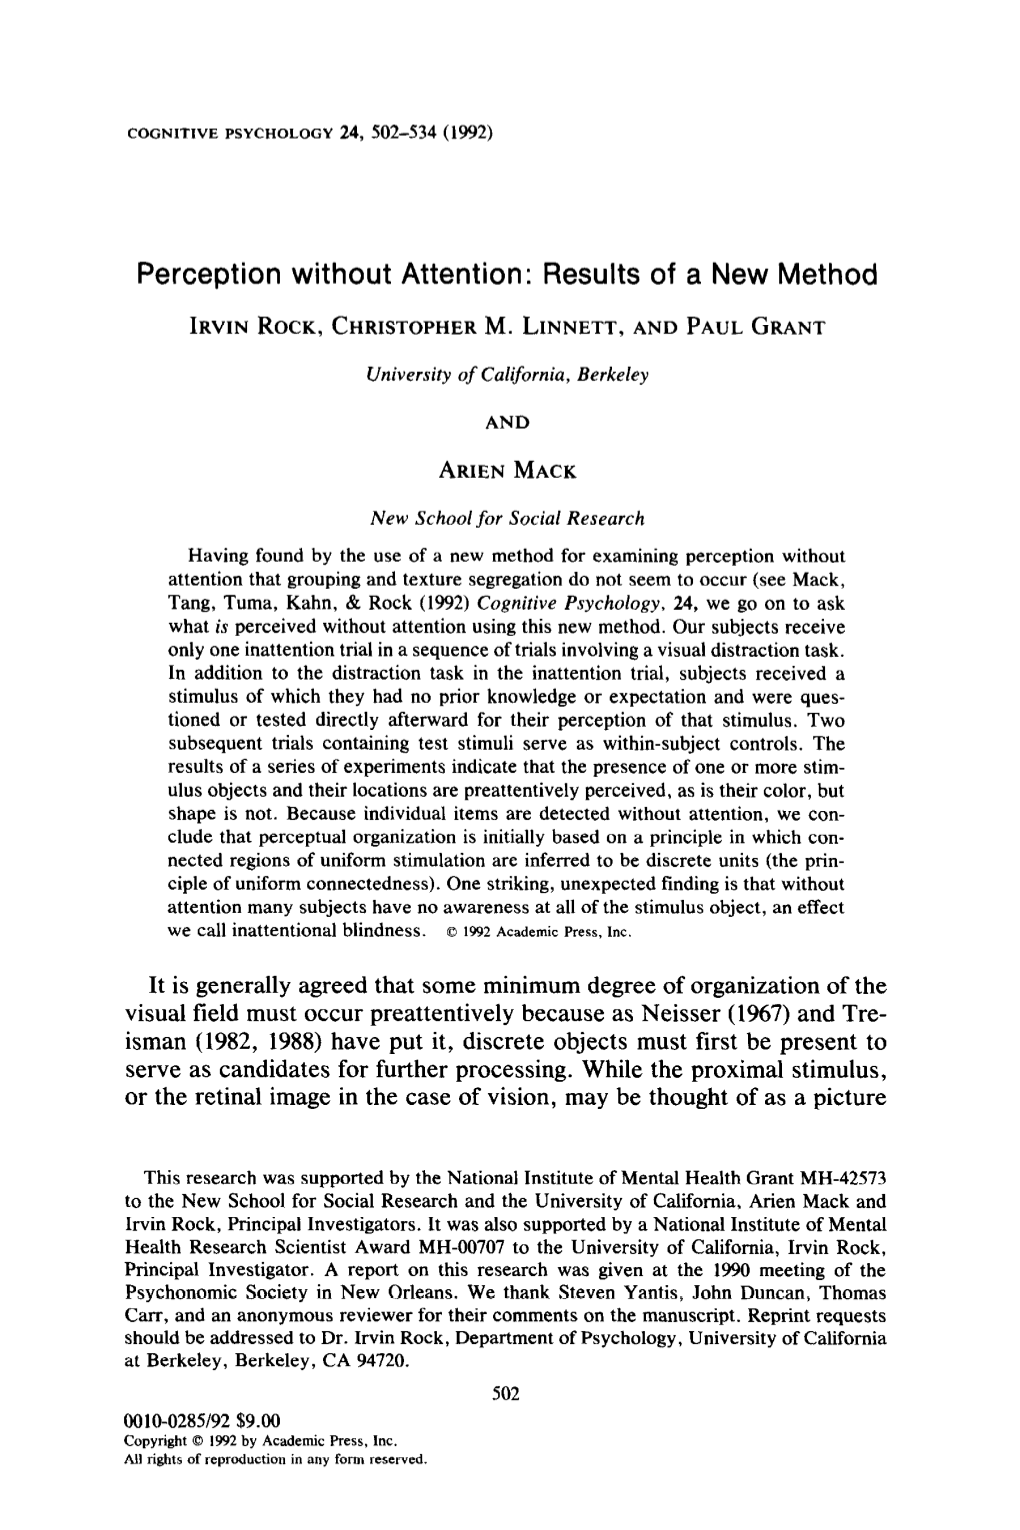 Perception Without Attention: Results of a New Method